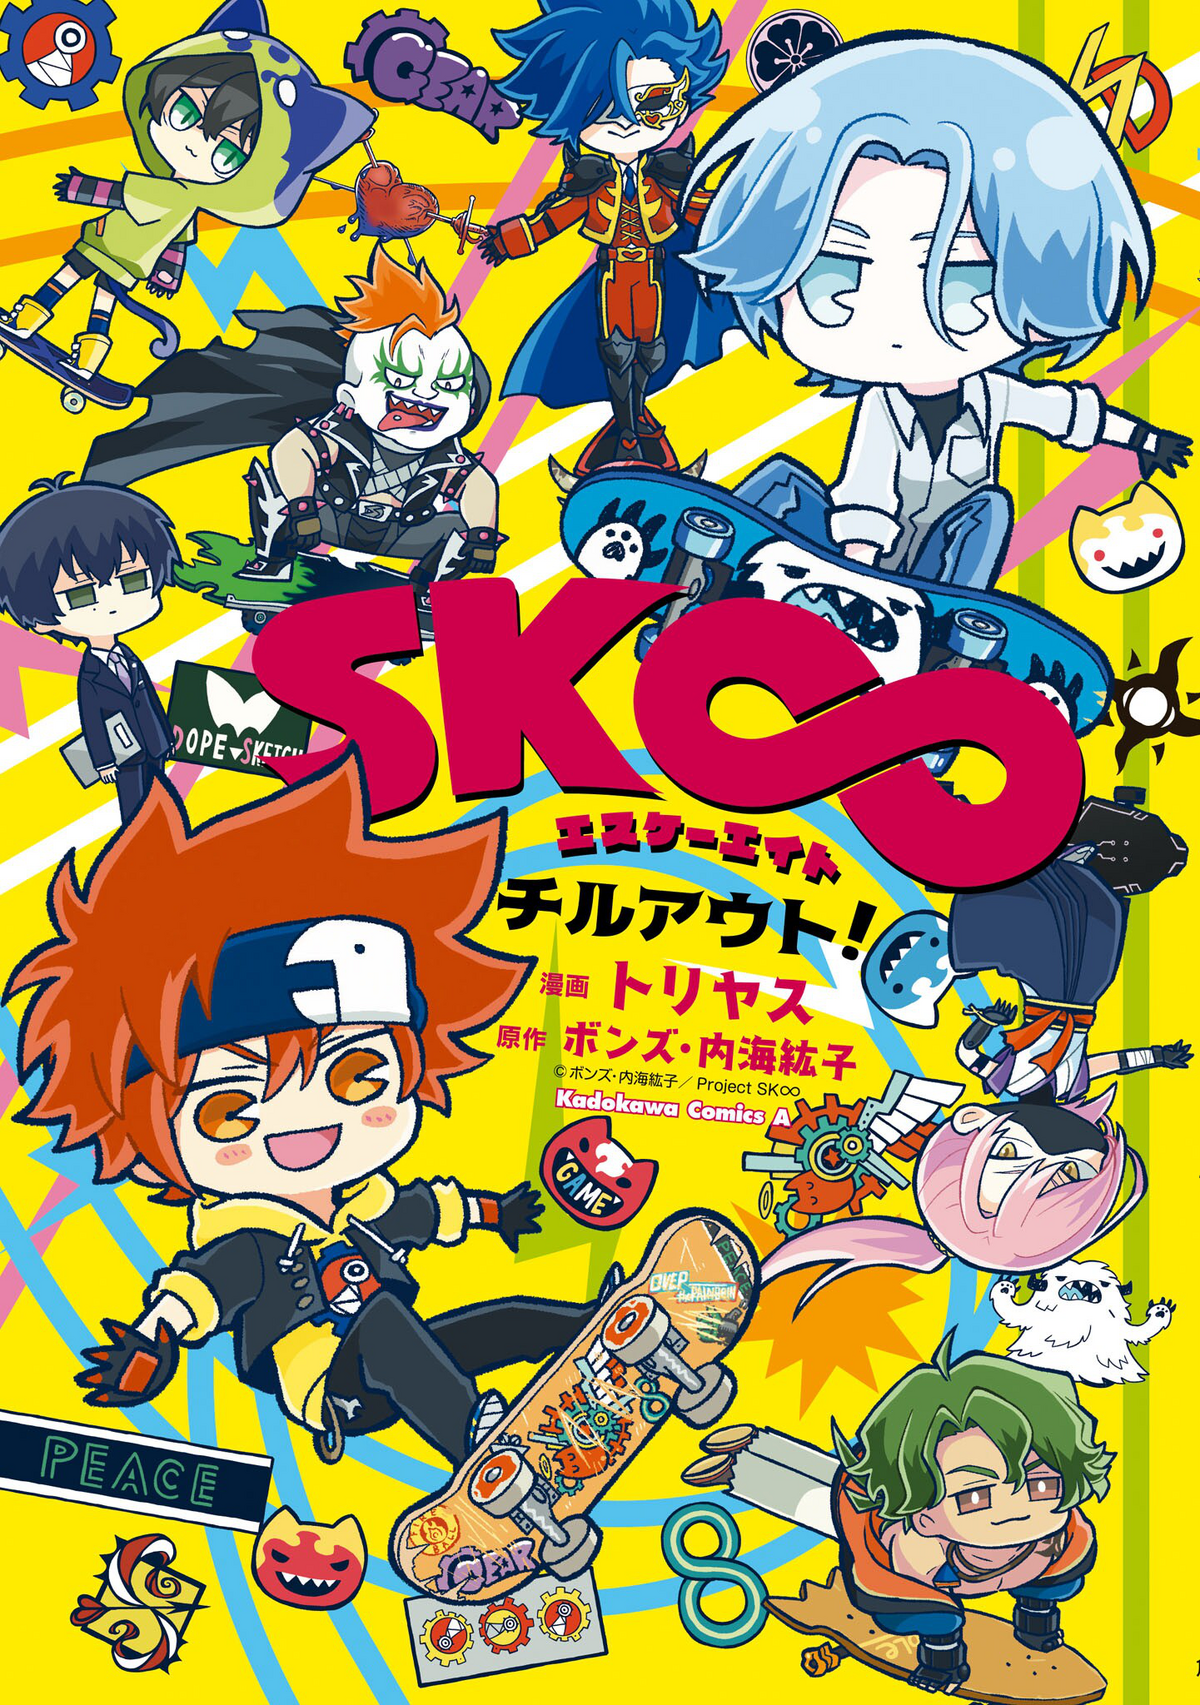 sk8 the infinity, manga spin off panel